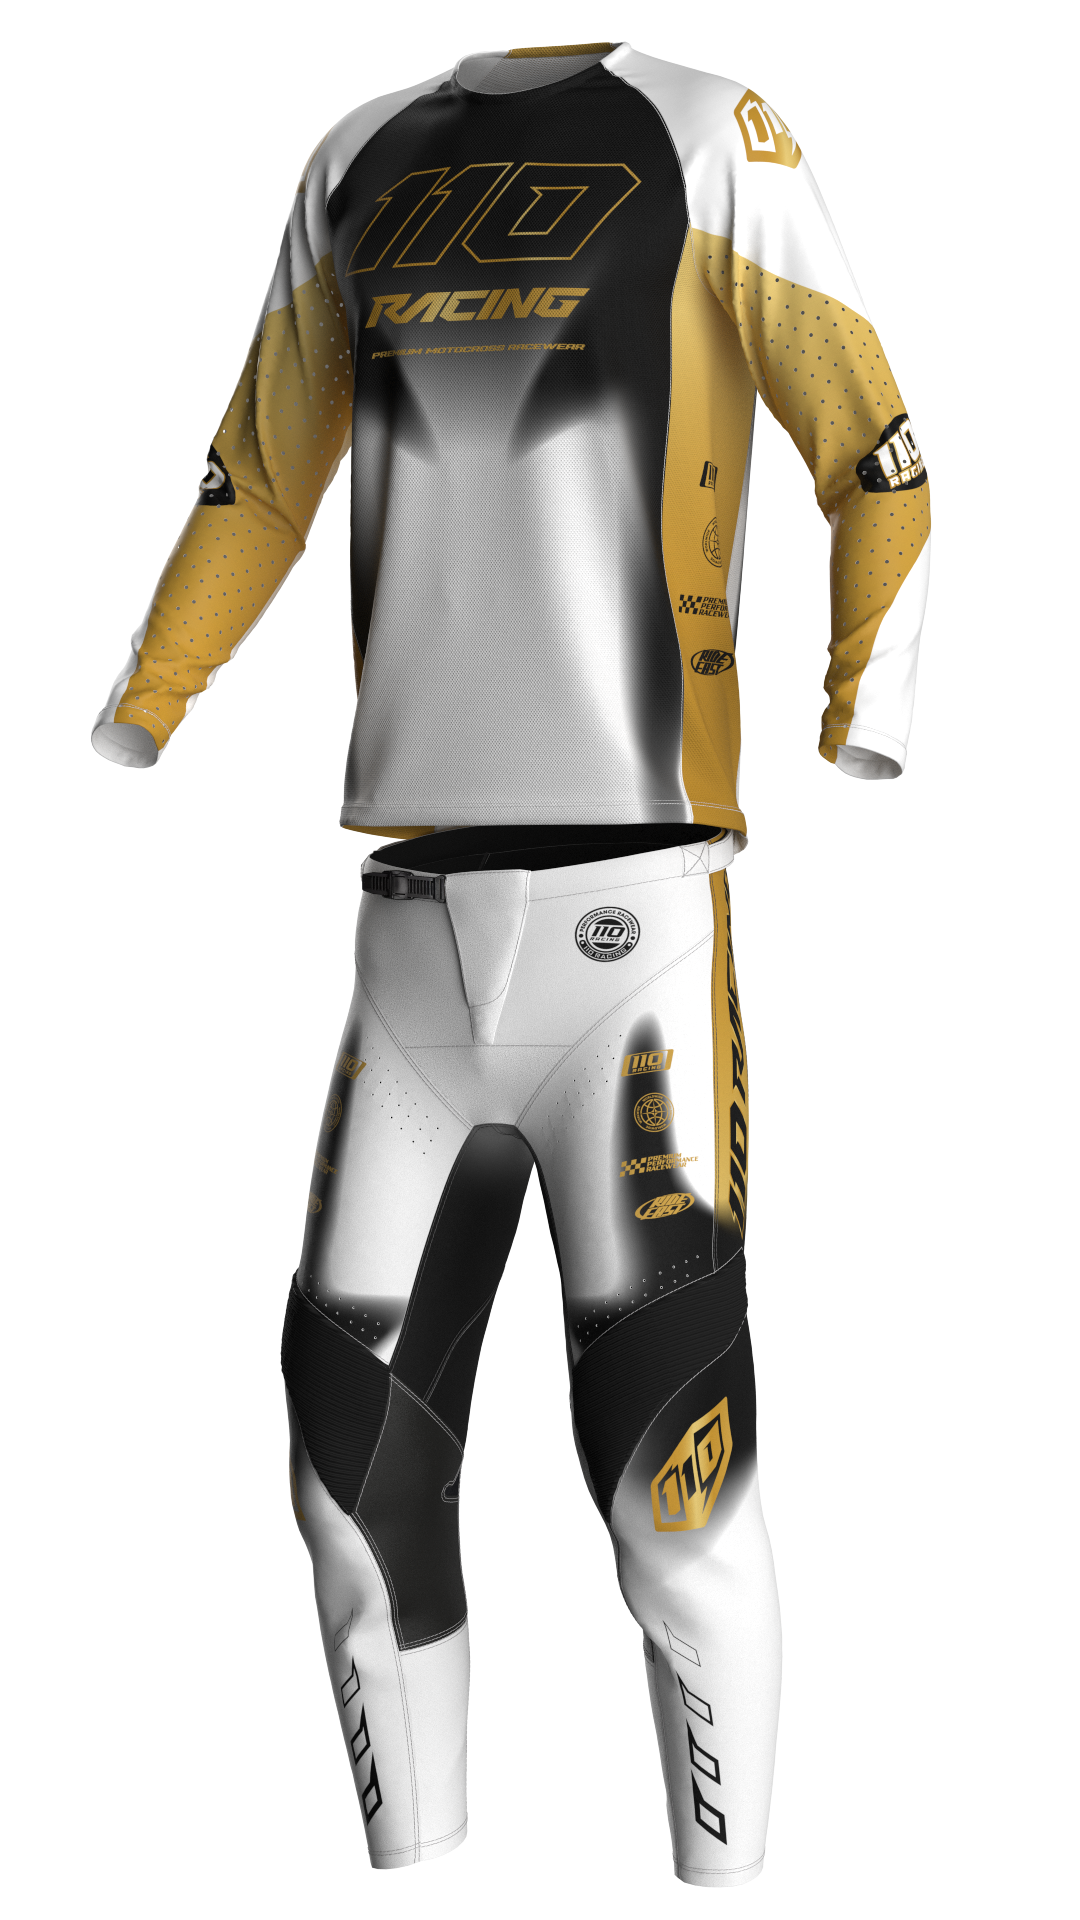 110 RACING // RS24.1 TECHART YOUTH PANT - WHITE/GOLD